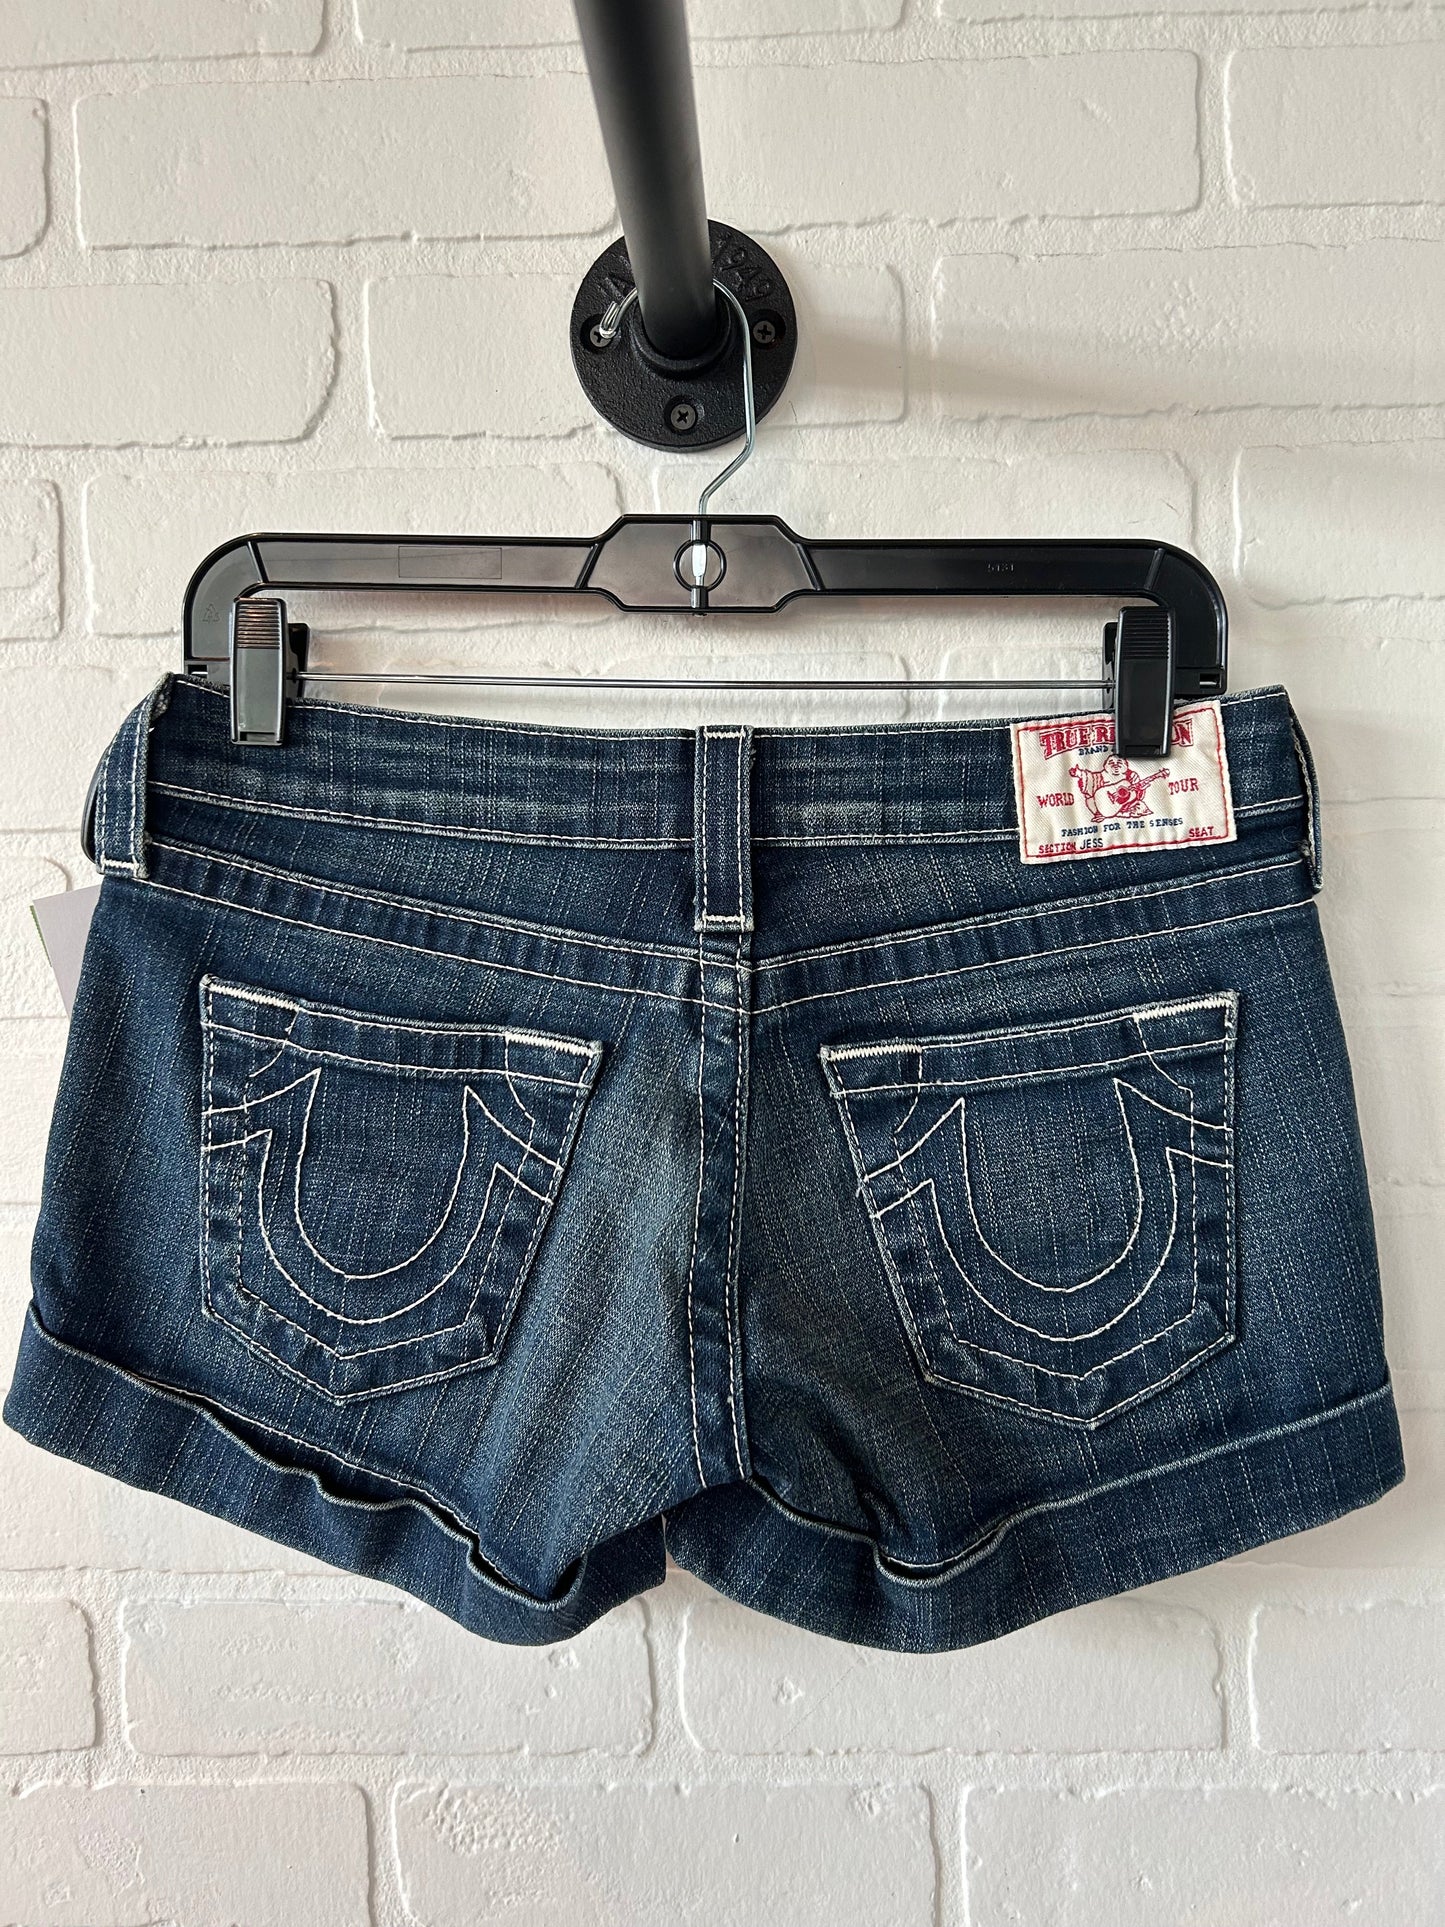 Shorts By True Religion  Size: 6